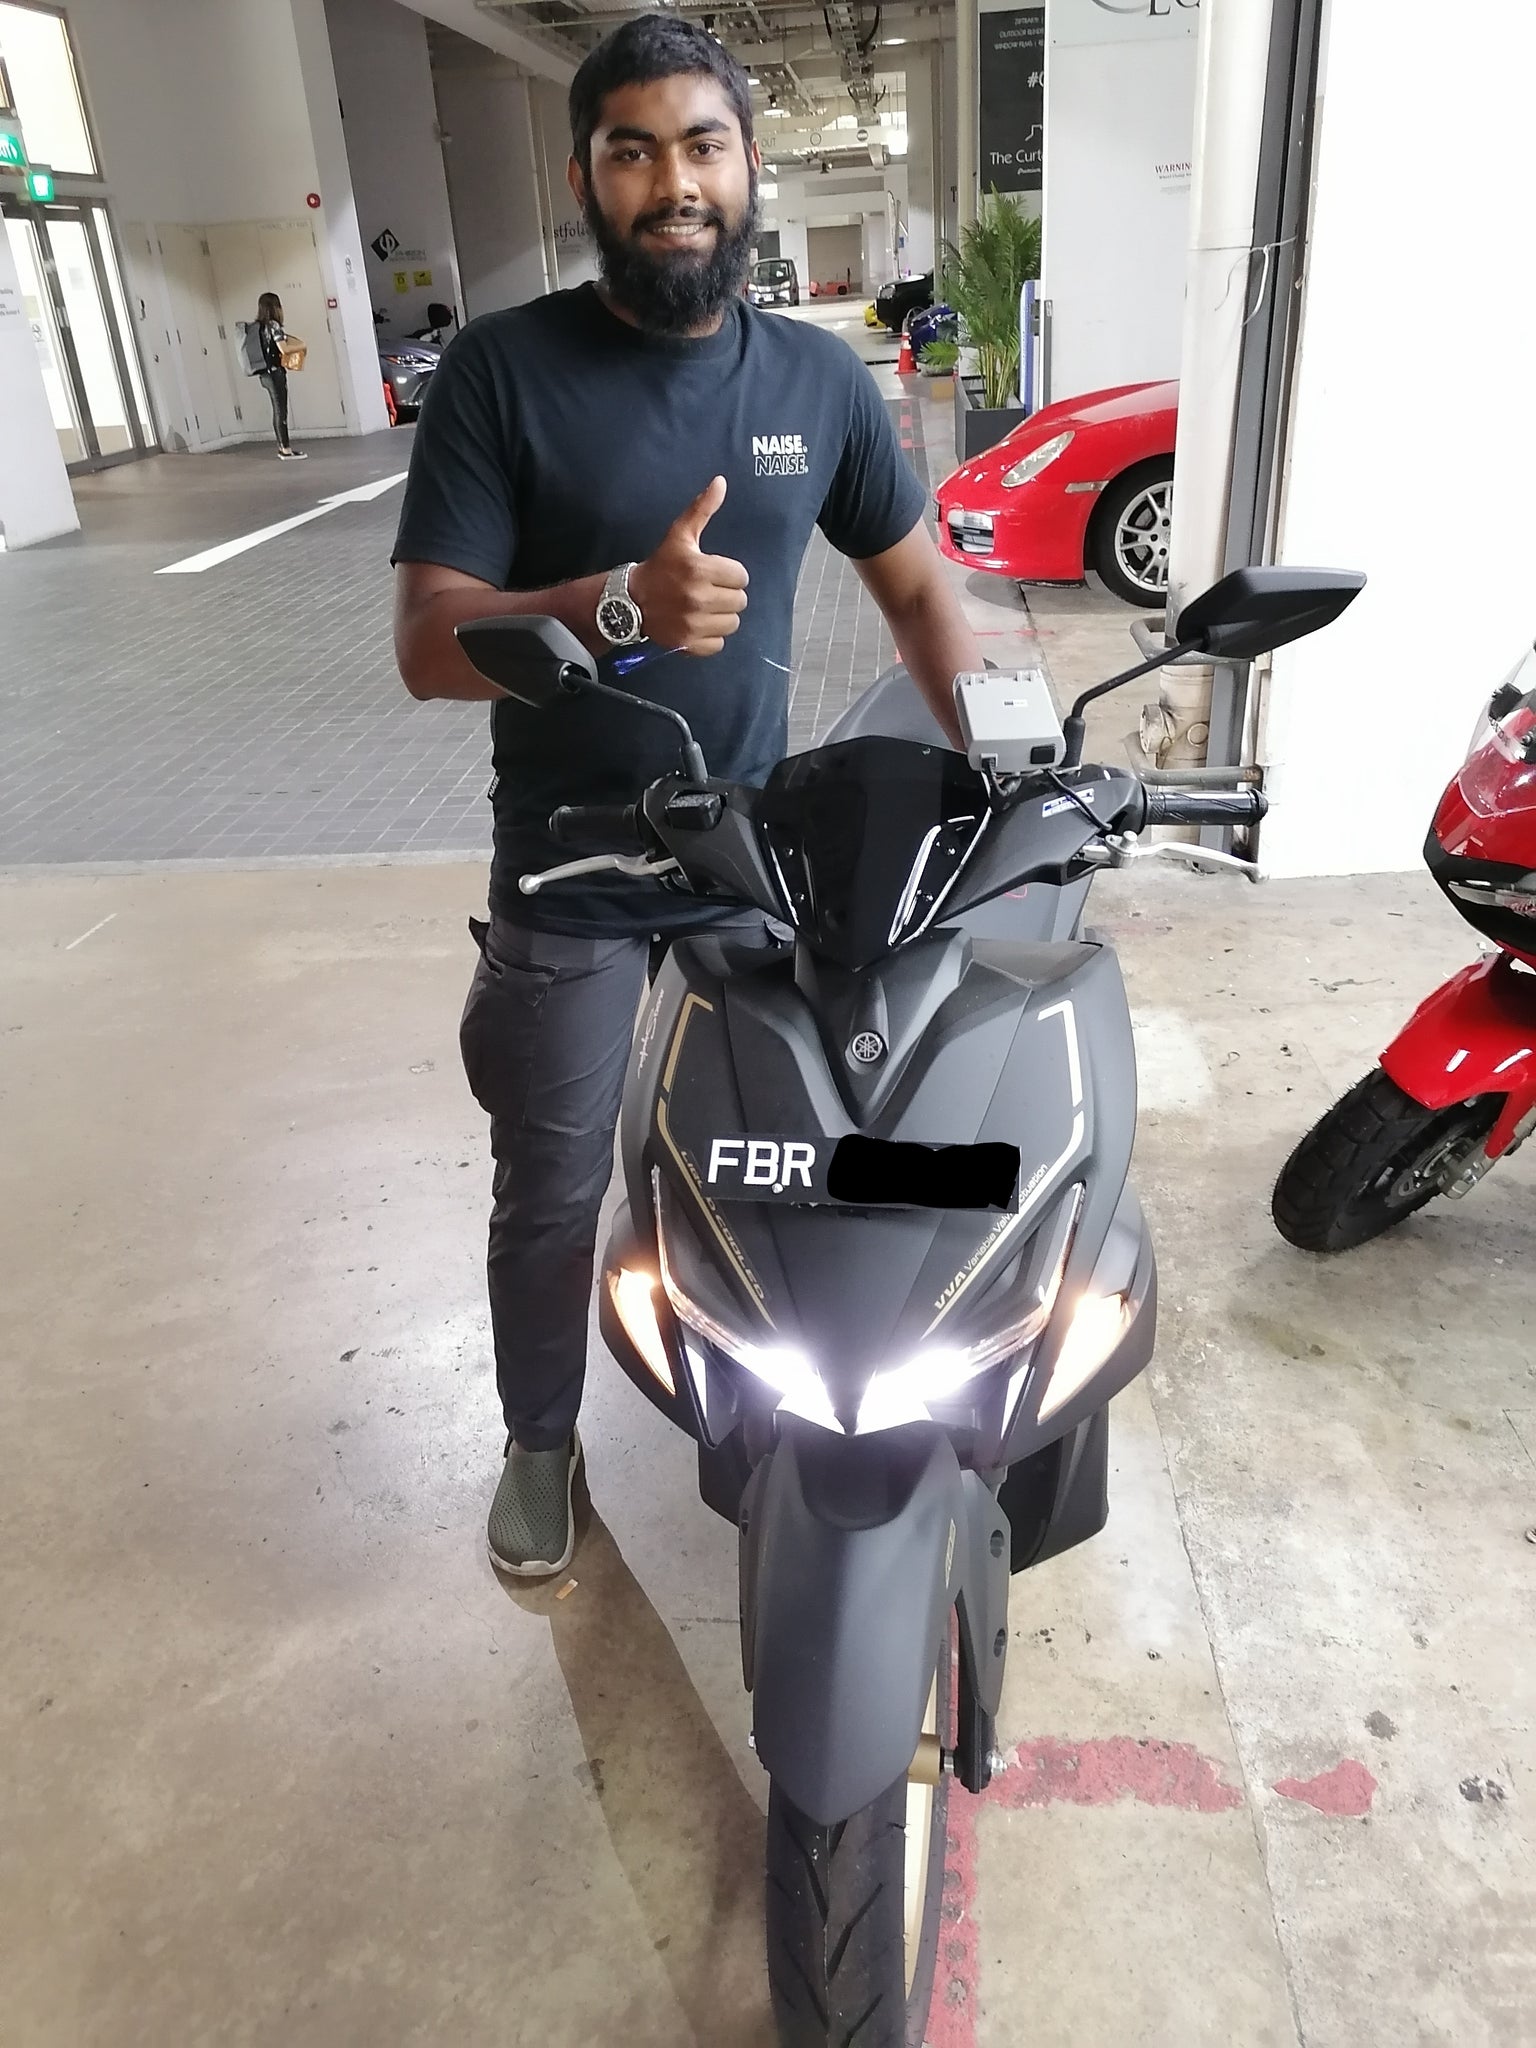 Hire a Yamaha Aerox 155 Scooter in Koh Samui from $7 per day